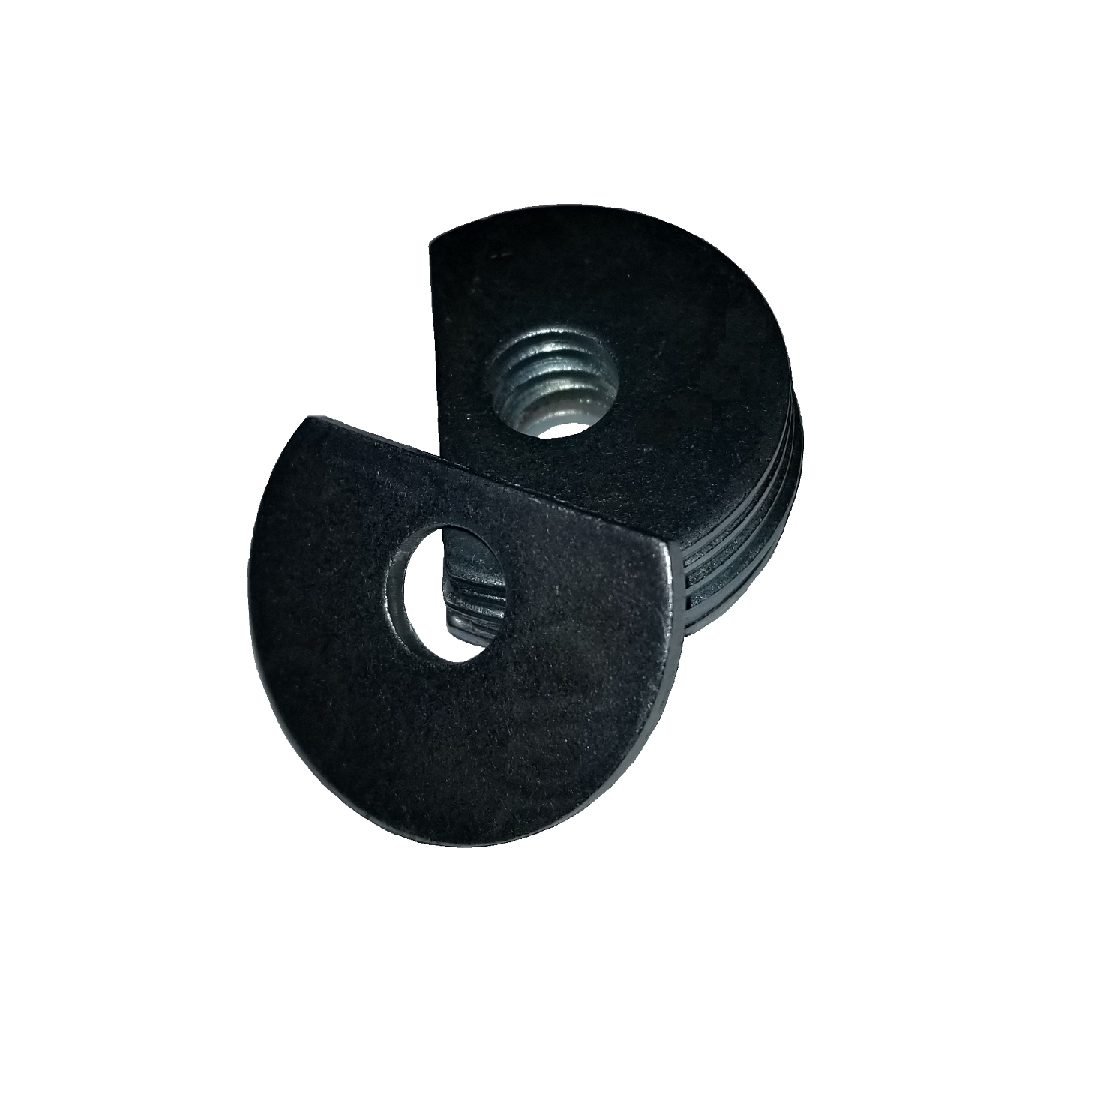 Clipped OD Washer - 0.640 ID, 1.375 OD, 0.187 Thick, Low Carbon Steel - Soft